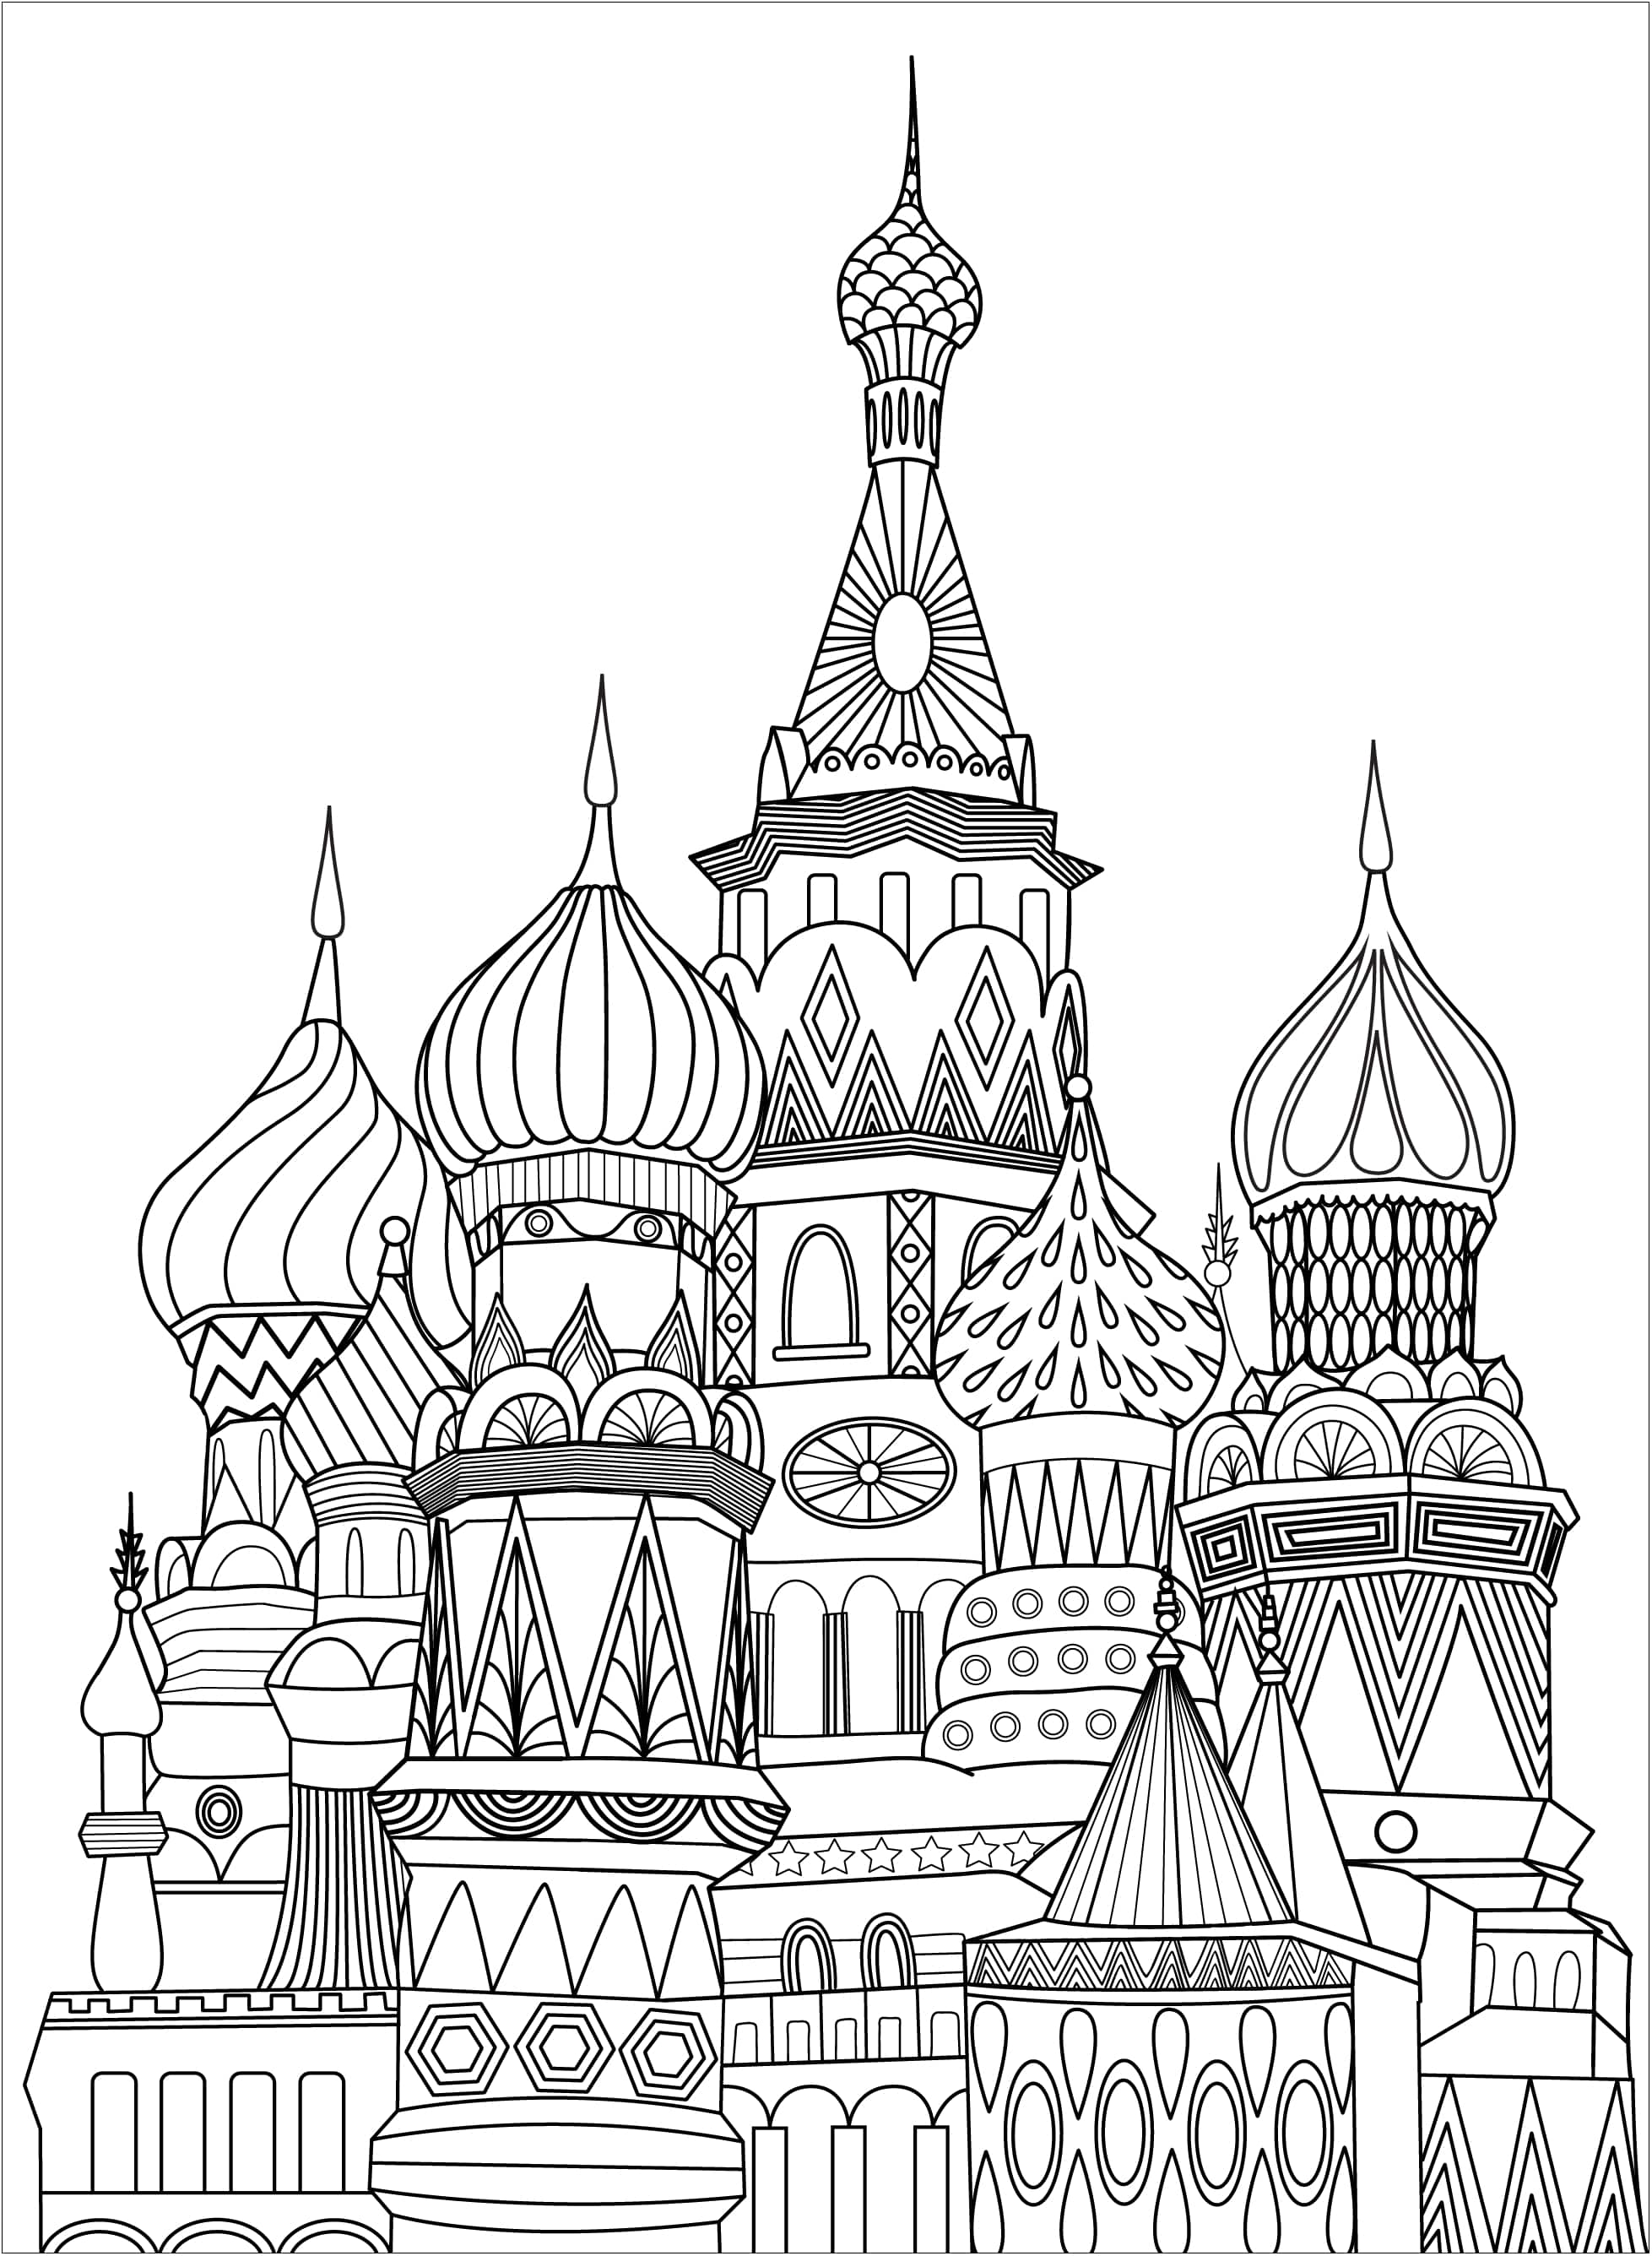 Unique coloring page representing Red Square in Moscow. Red Square is an open square in Moscow adjoining the historic fortress and centre of government known as the Kremlin, Artist : Elodie